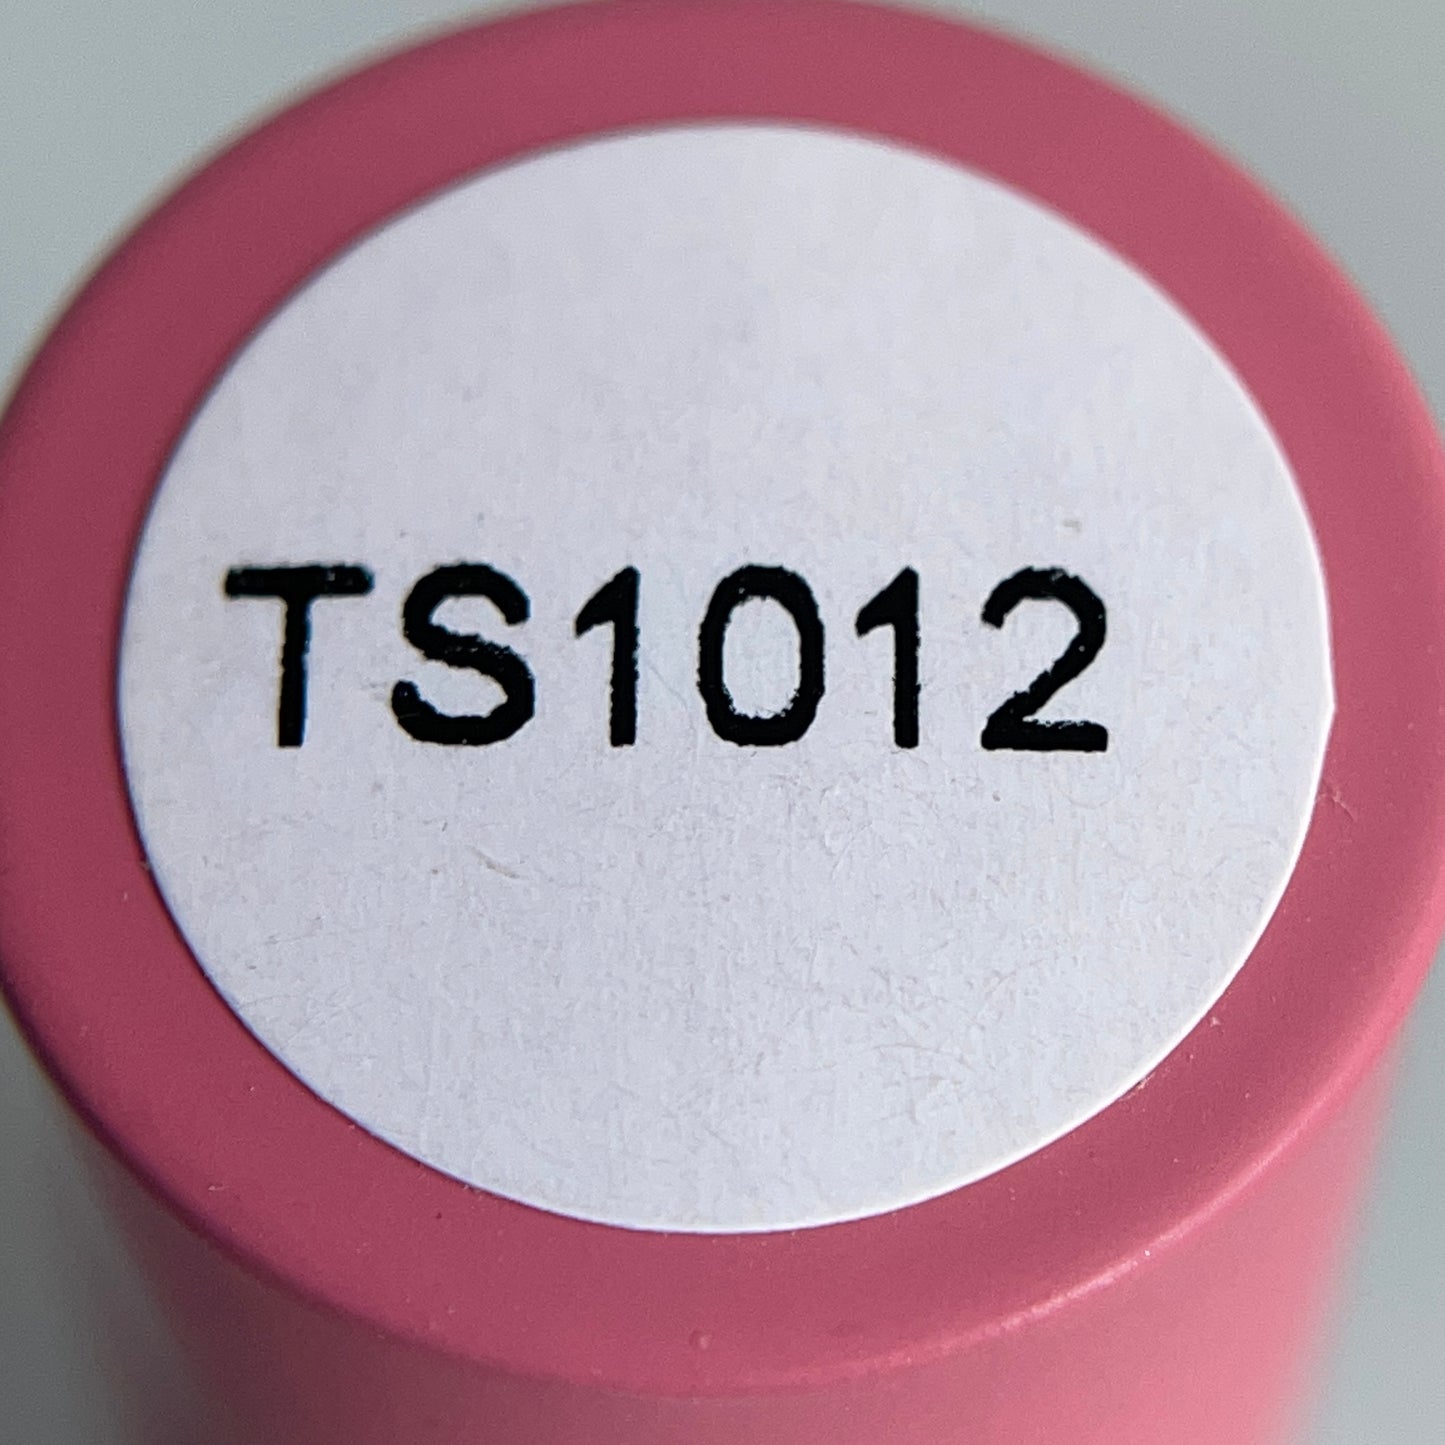 THINK OF NAIL Gel Color TS-1012 from Milk & Cream COLLECTION (8 ml)